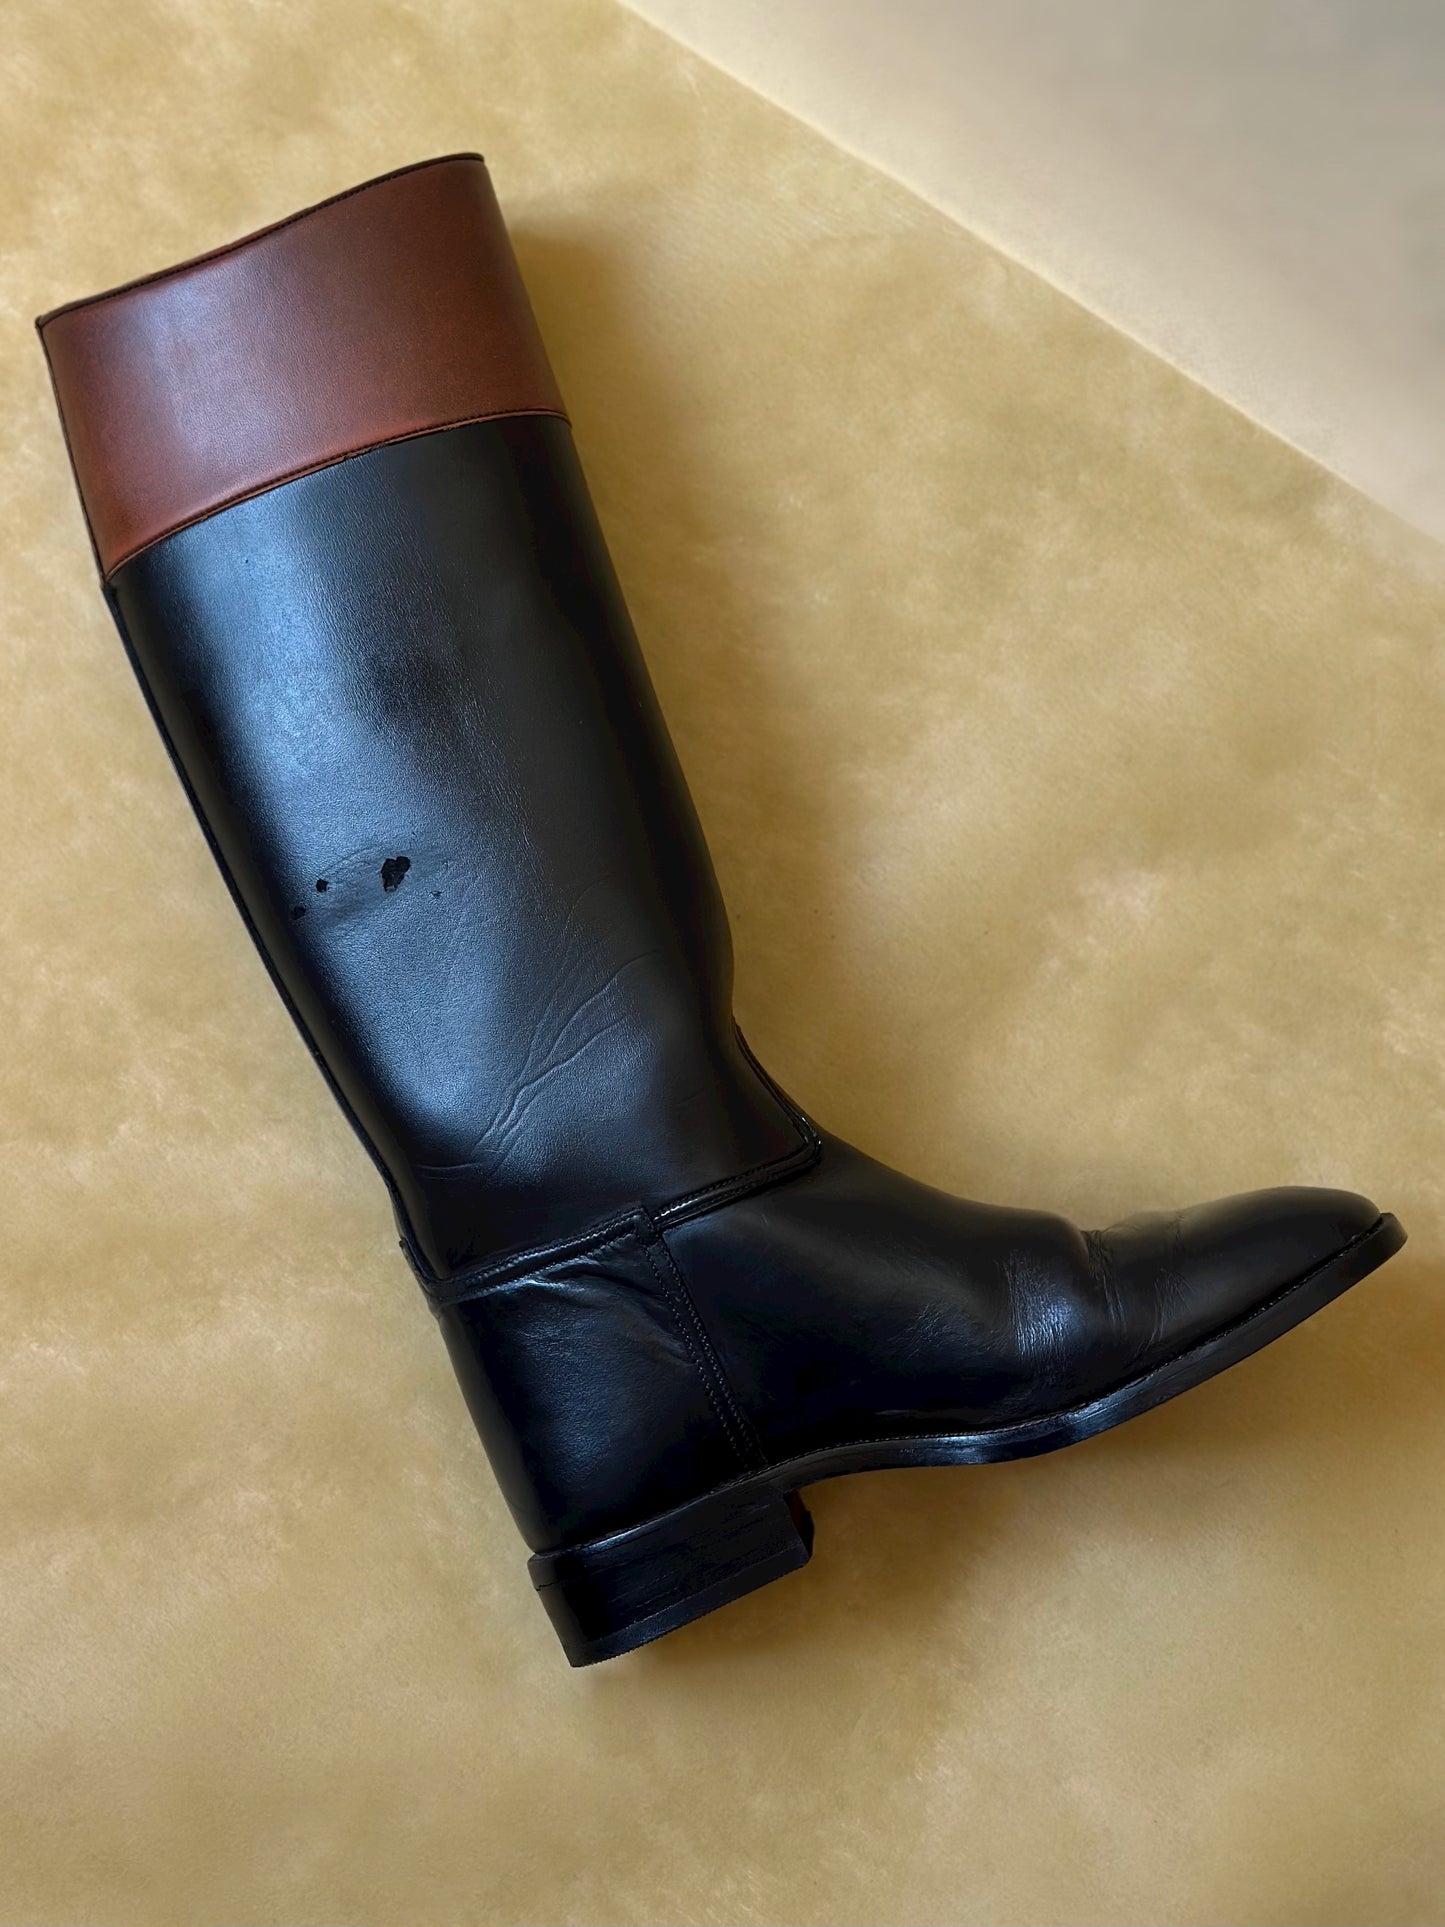 Vintage Black & Brown Leather Riding Boots n. 38 IT